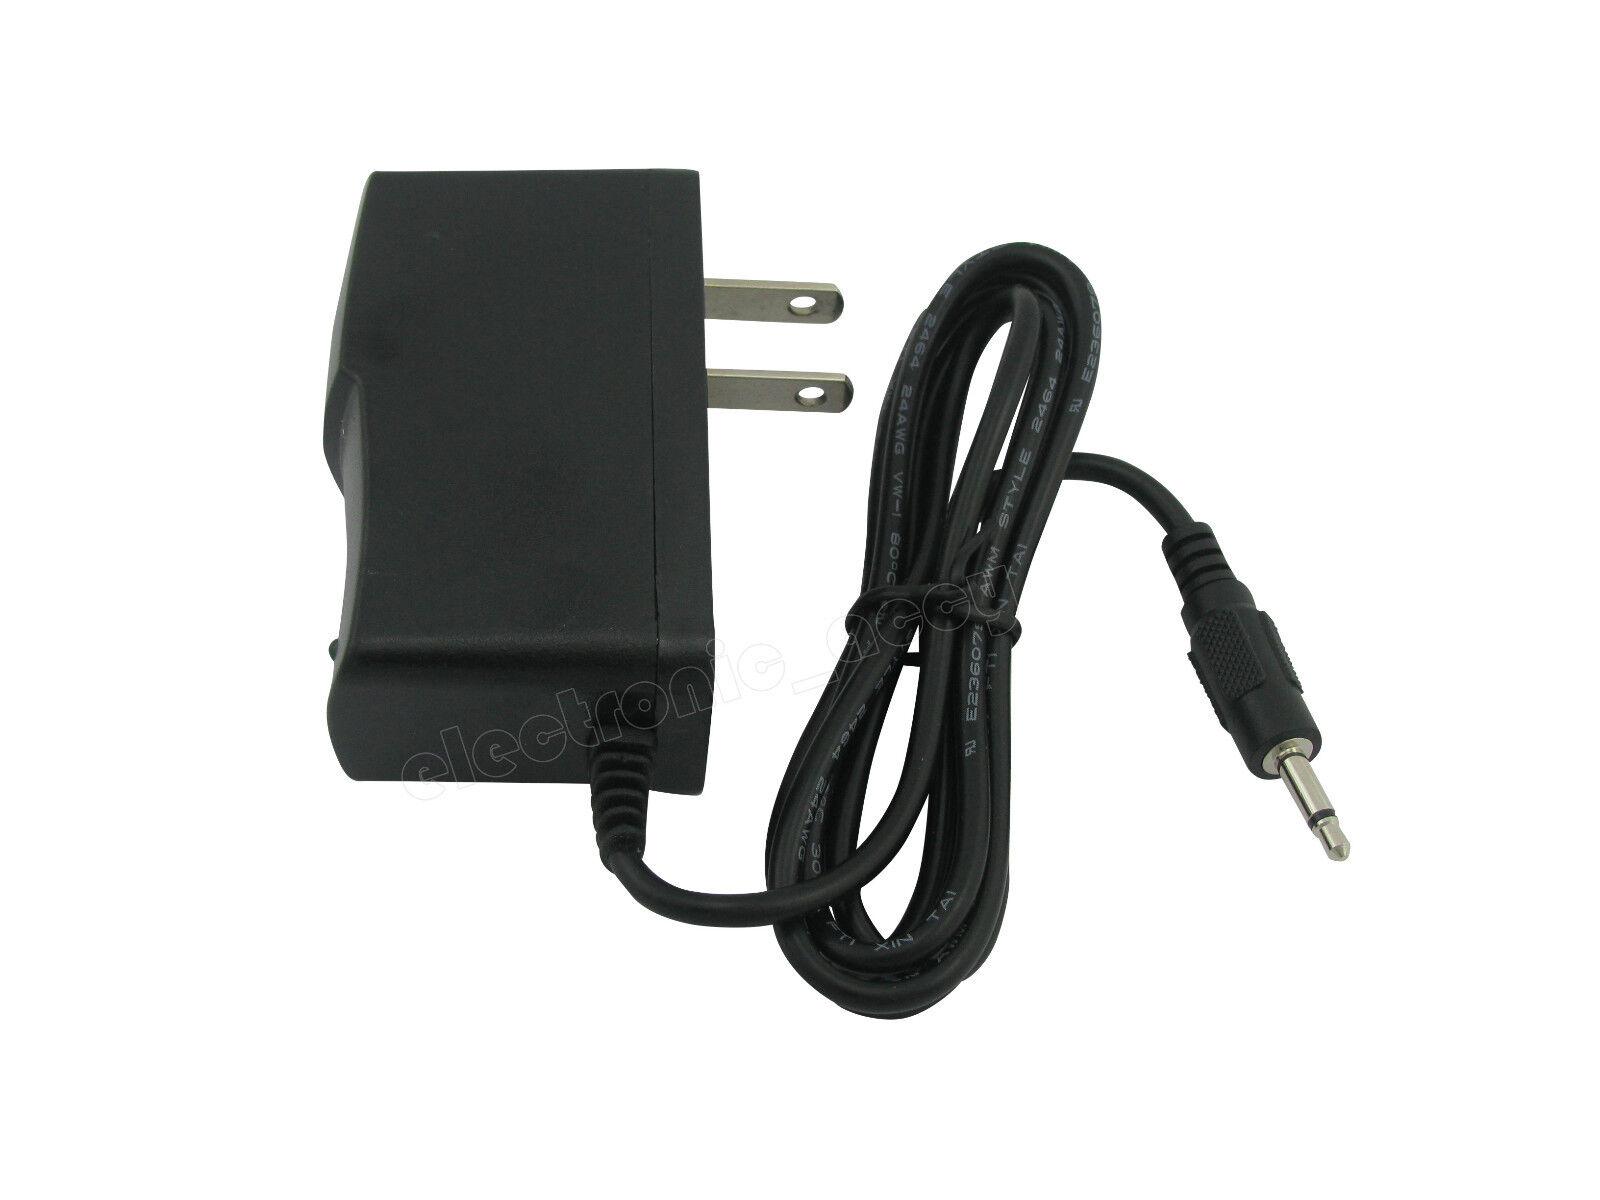 New AC Power Supply Adapter For ATARI 2600 System Console New AC Power Supply Adapter For ATARI 2600 System Console - Click Image to Close